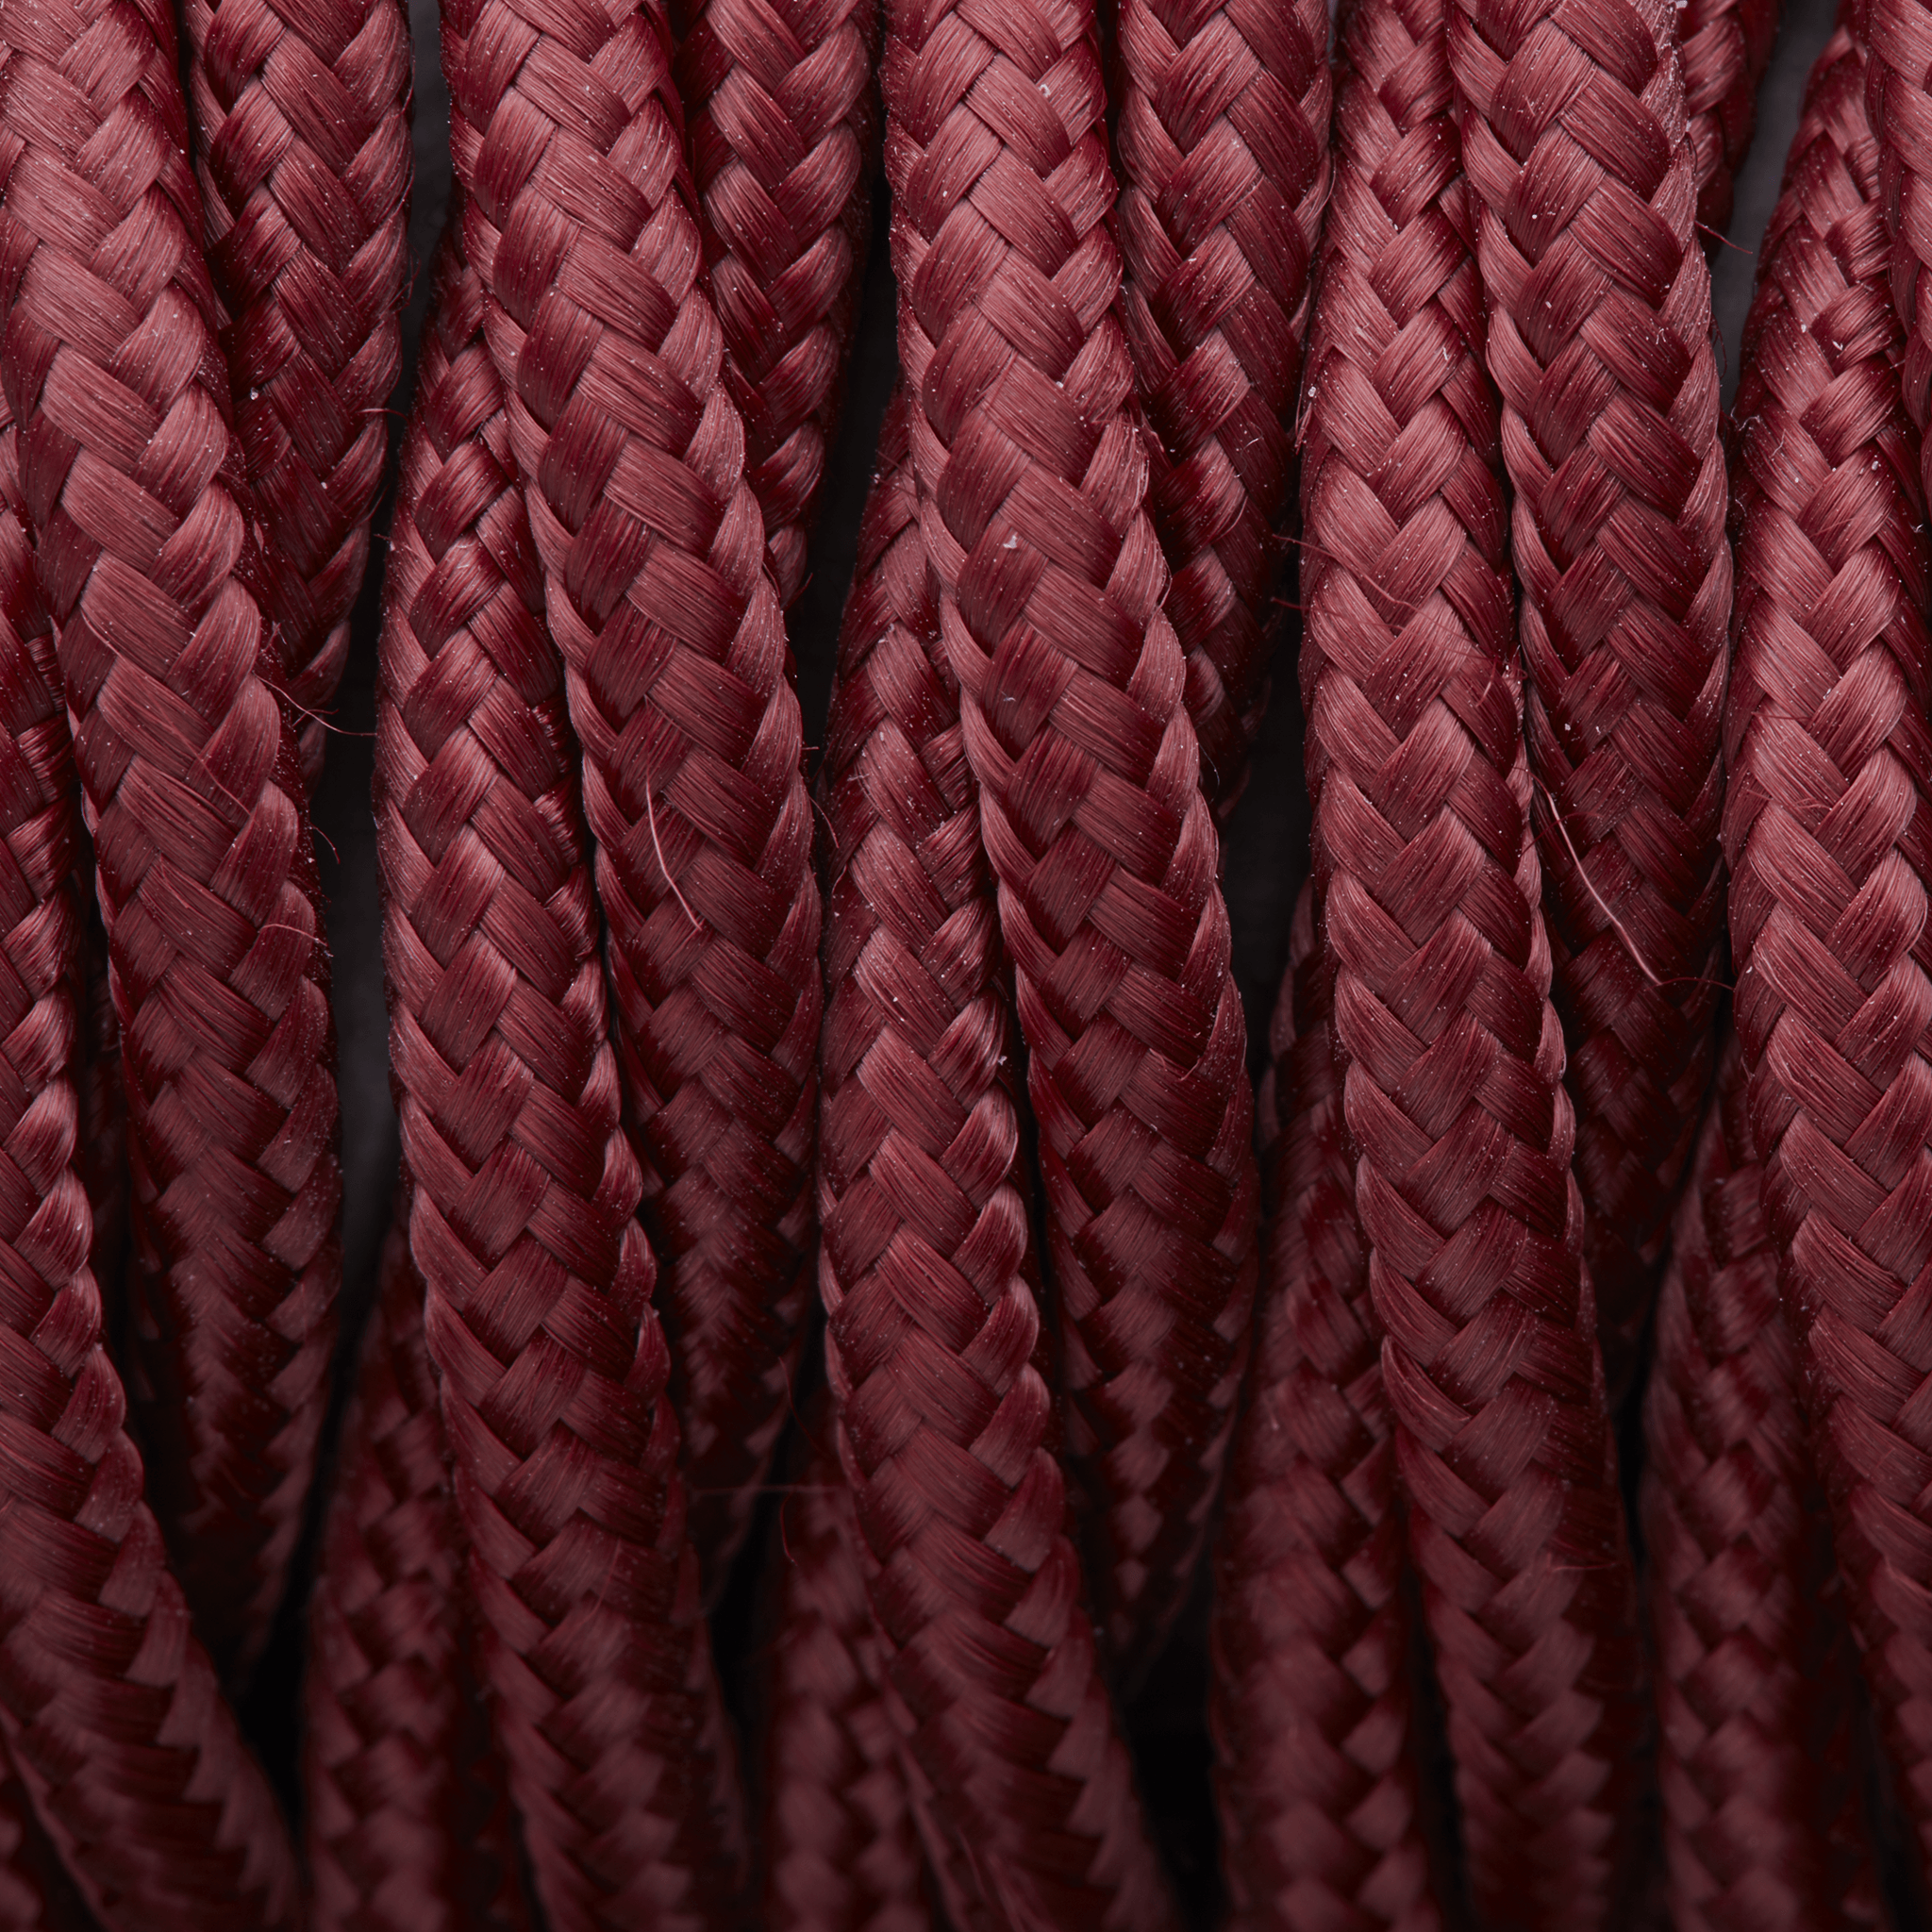 Industville – Twisted Fabric Flex – 3 Core Braided Cloth Cable Lighting Wire – Fabric Flex Cable – Burgundy Colour – Braided Woven Cloth Material – 100 CM